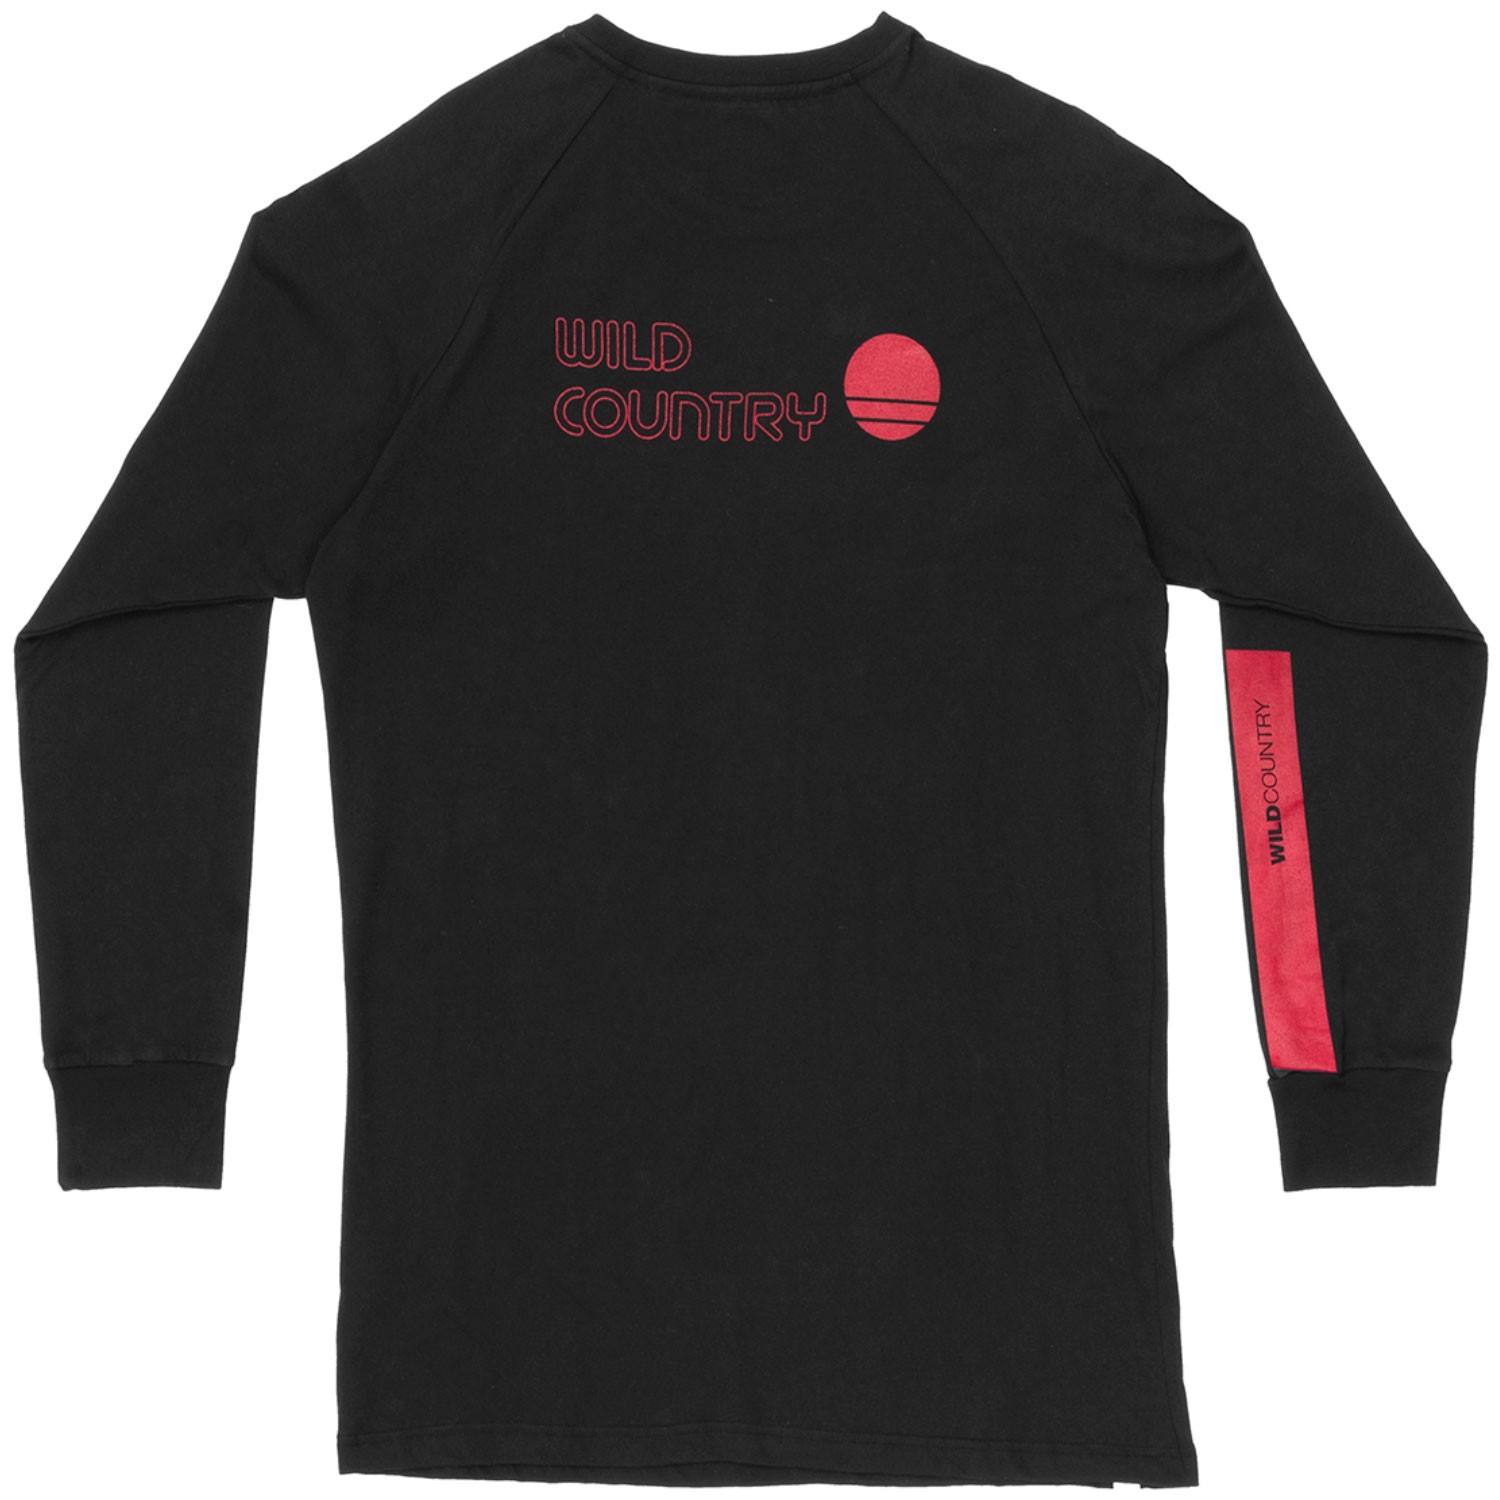 Wild Country Stanage Long Sleeve Tee - Black Out